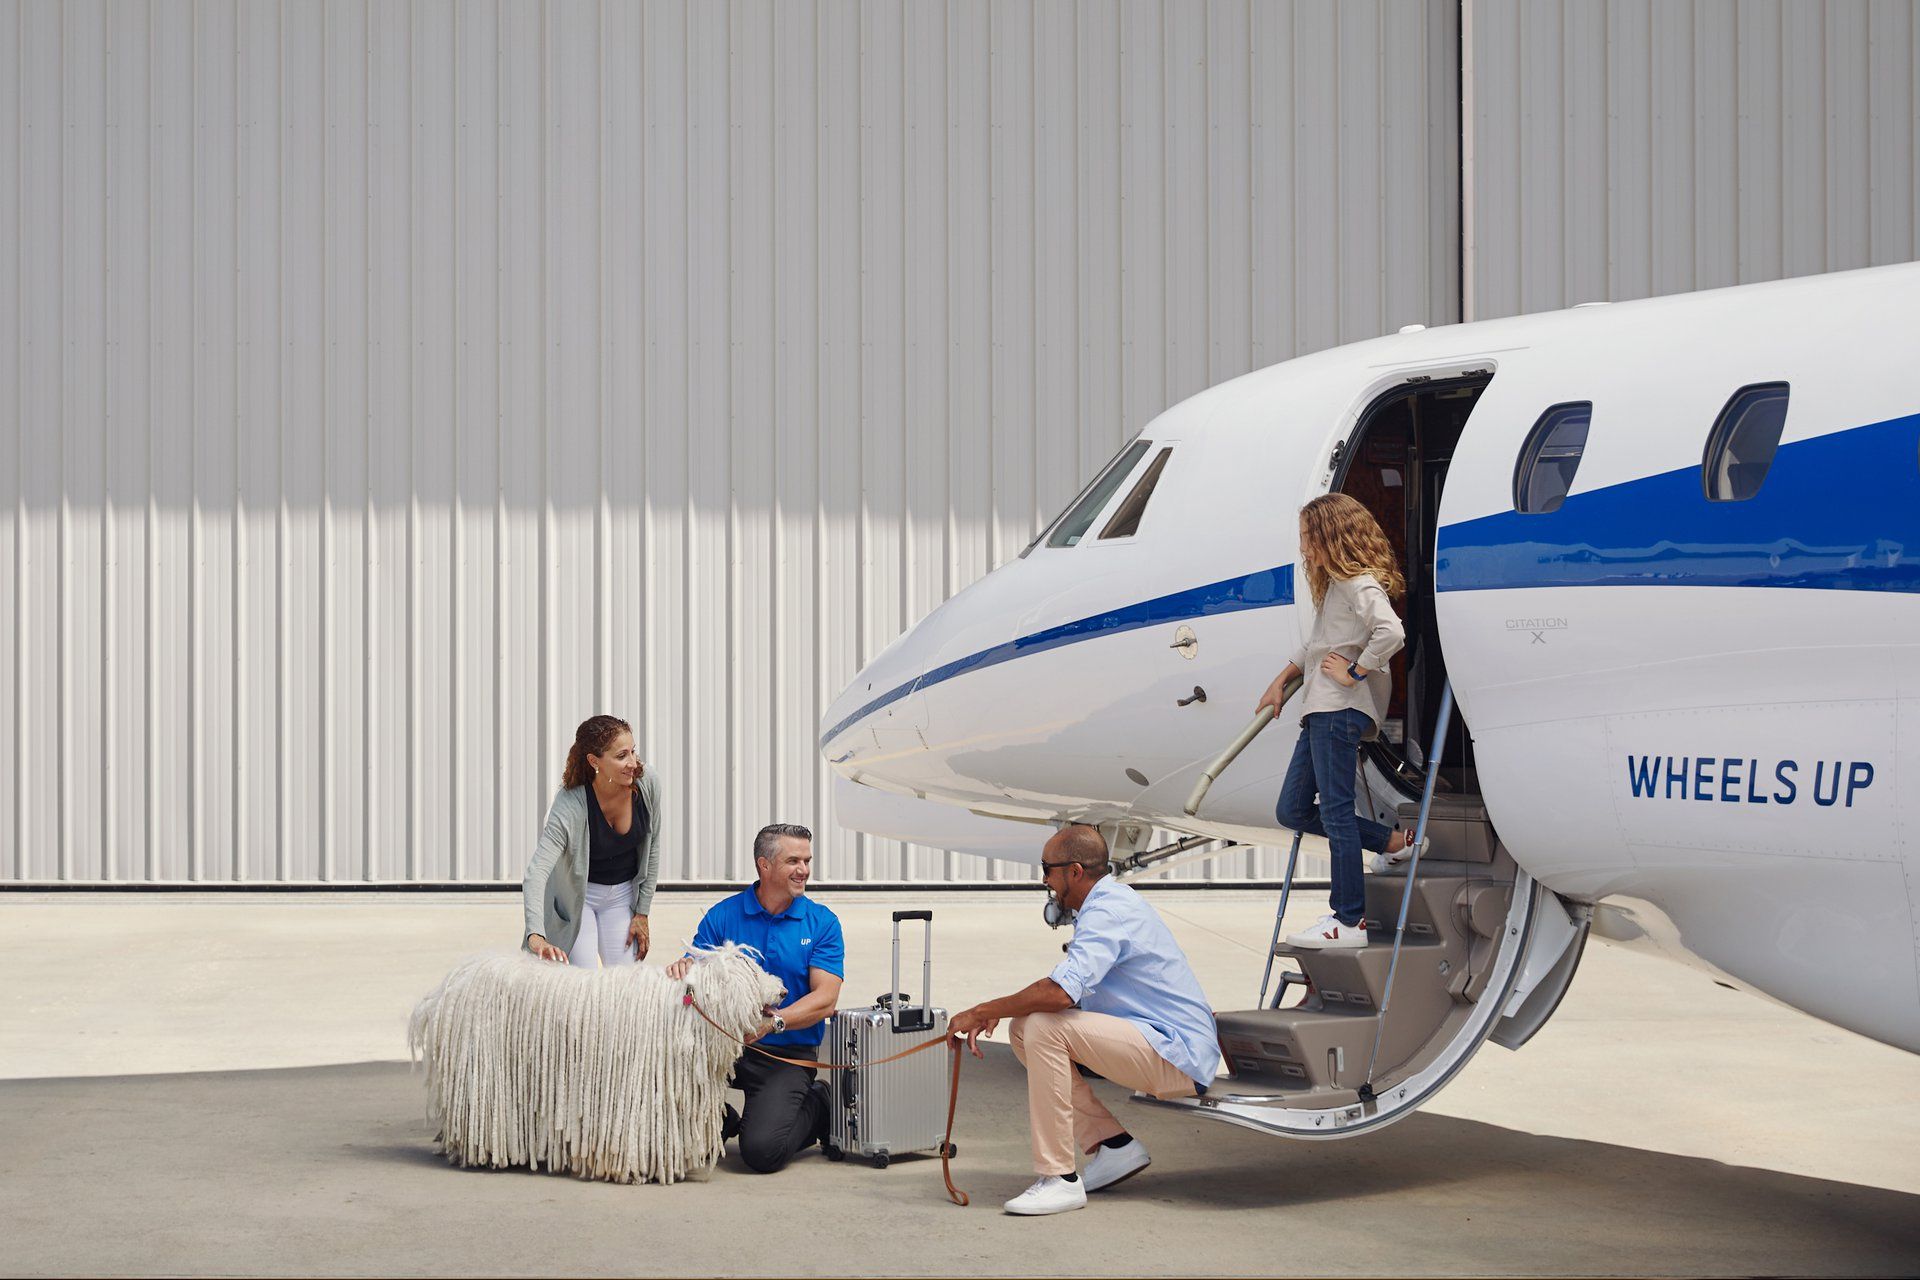 A family boarding a Wheels Up business aircraft.